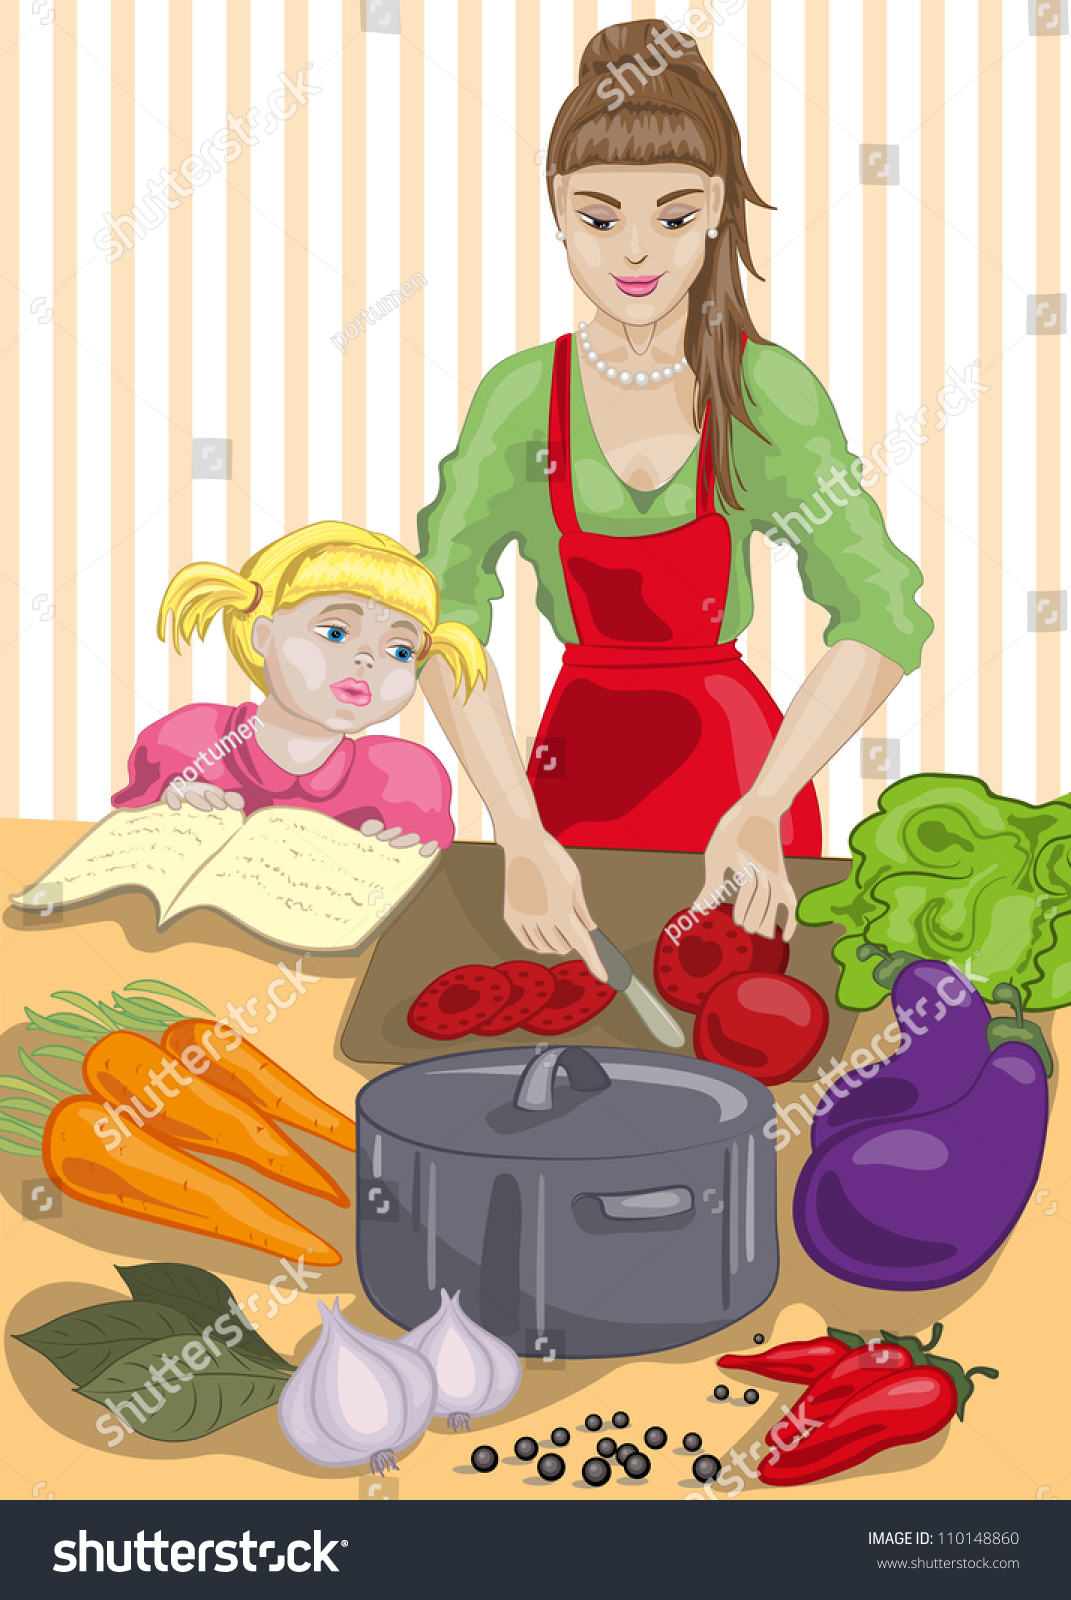 Mother Daughter Cooking File Illustrator 10 Stock Vector Royalty Free 110148860 Shutterstock 